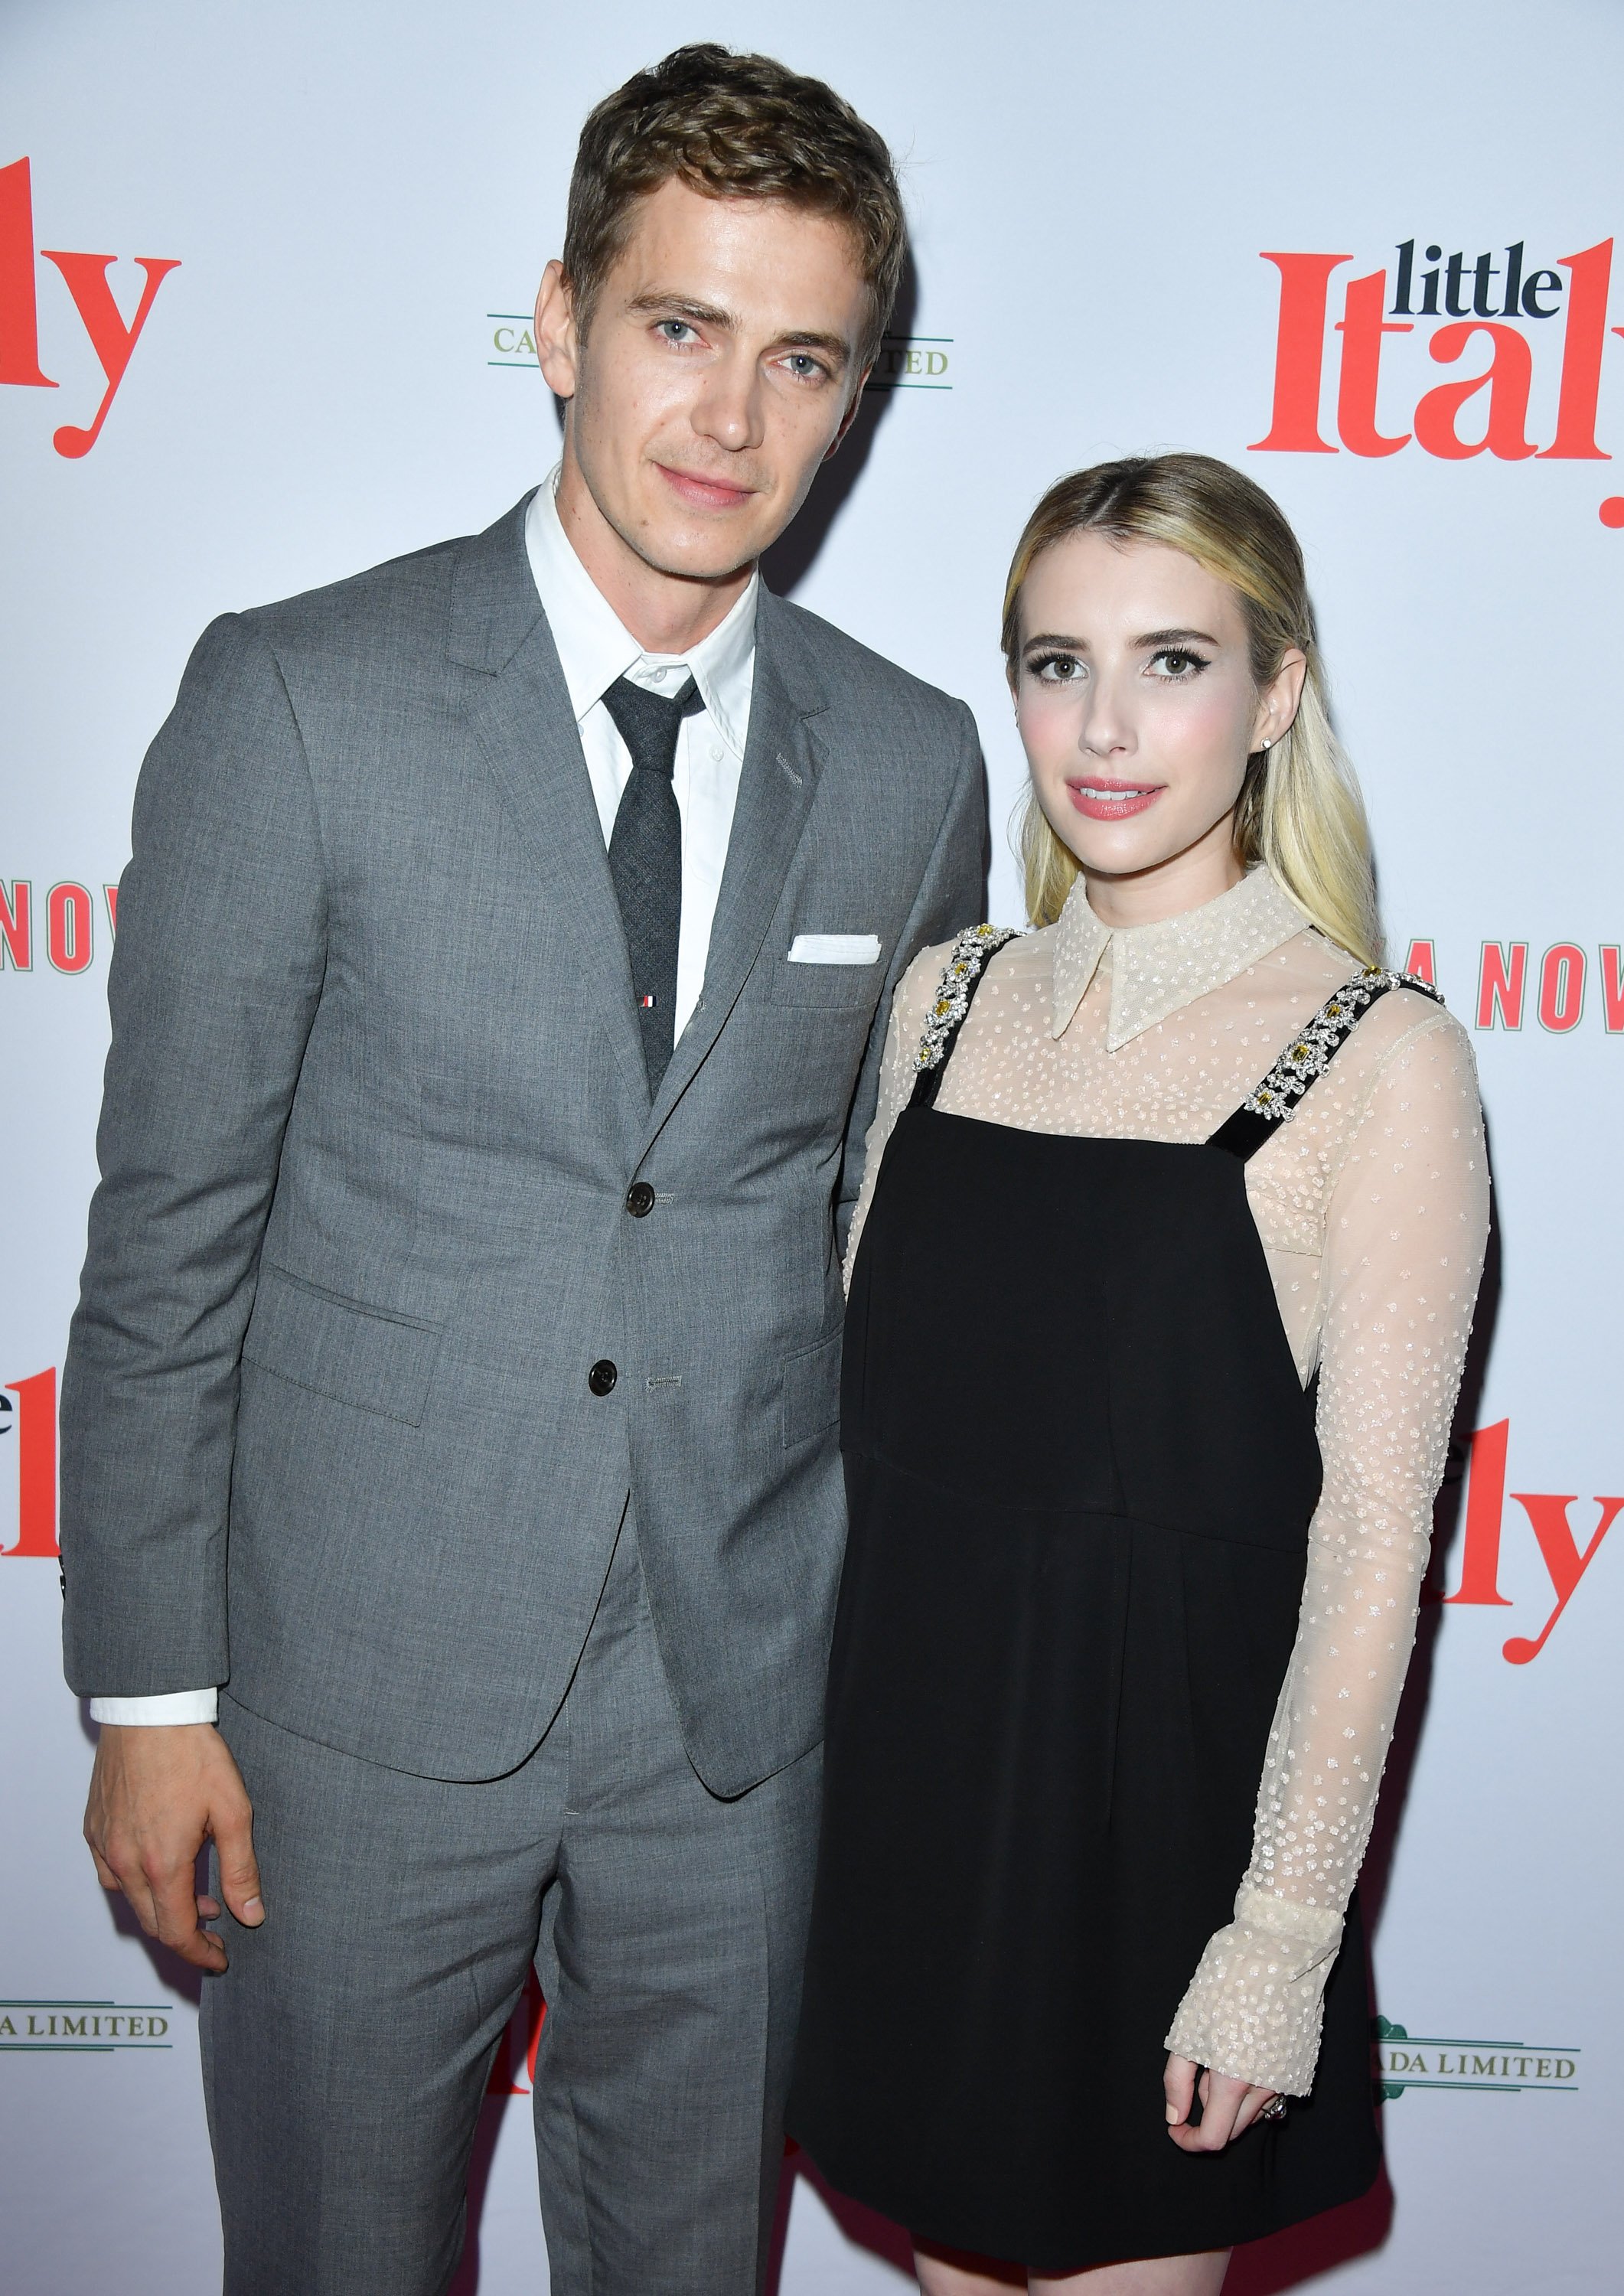 Hayden Christensen and Emma Roberts at the world premiere of "Little Italy" on August 22, 2018 | Source: Getty Images